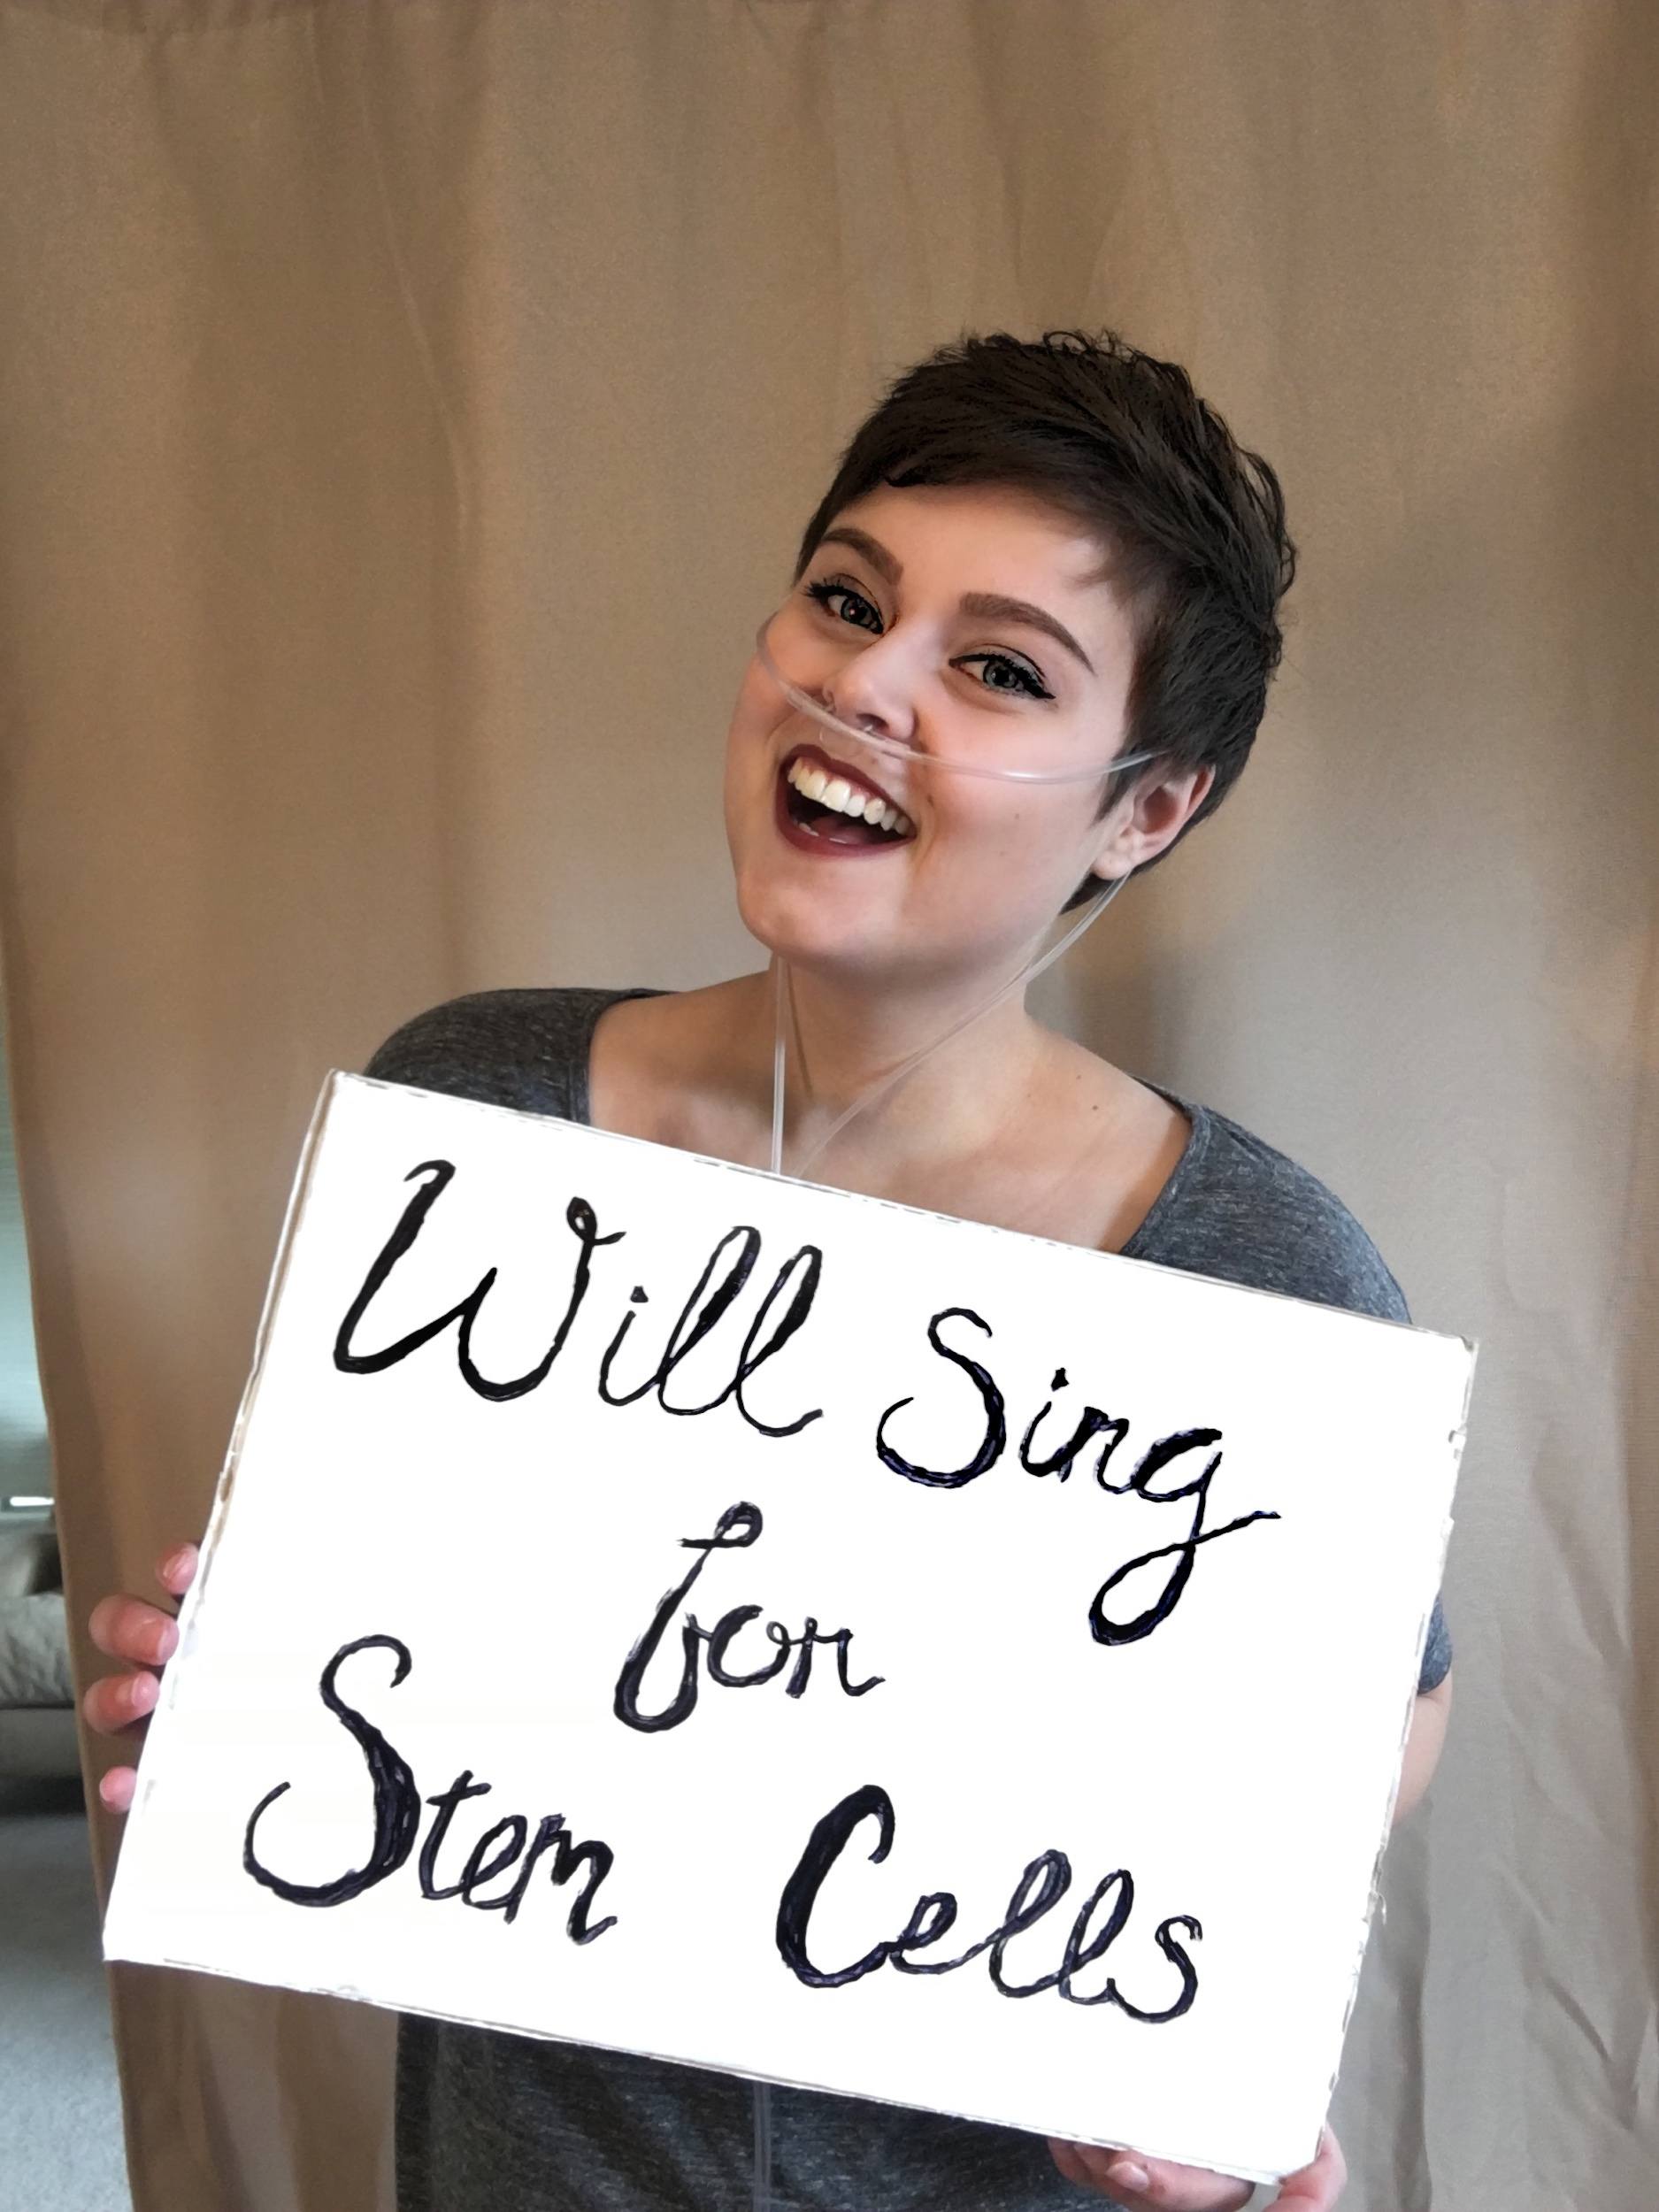 Bothell resident Chanel White has started a Singing for Stem Cells campaign online to raise funds for a clinical human trial she's participating in to combat her systemic sclerosis. Submitted photo